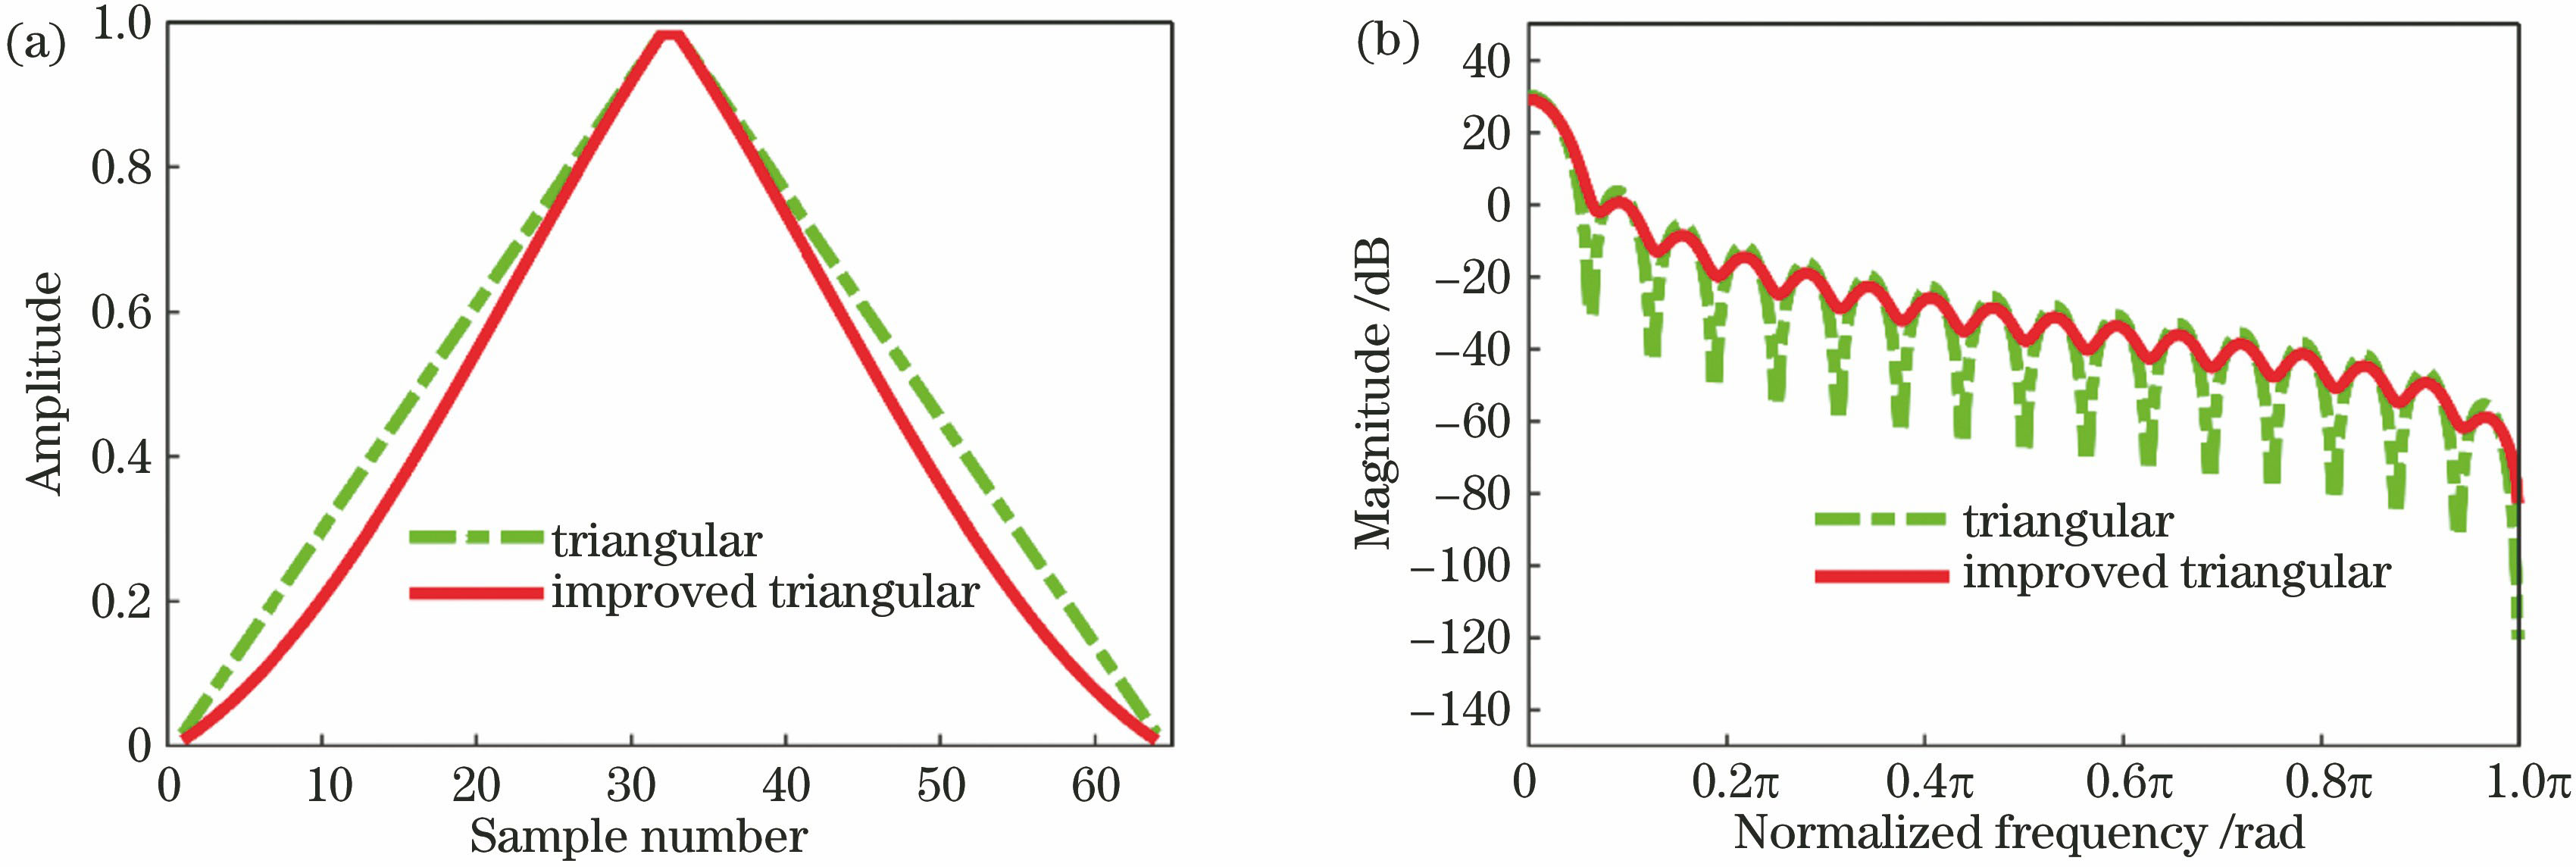 Time-frequency domain analysis of triangular window and improved triangular window apodization functions. (a) Time domain; (b) frequency domain